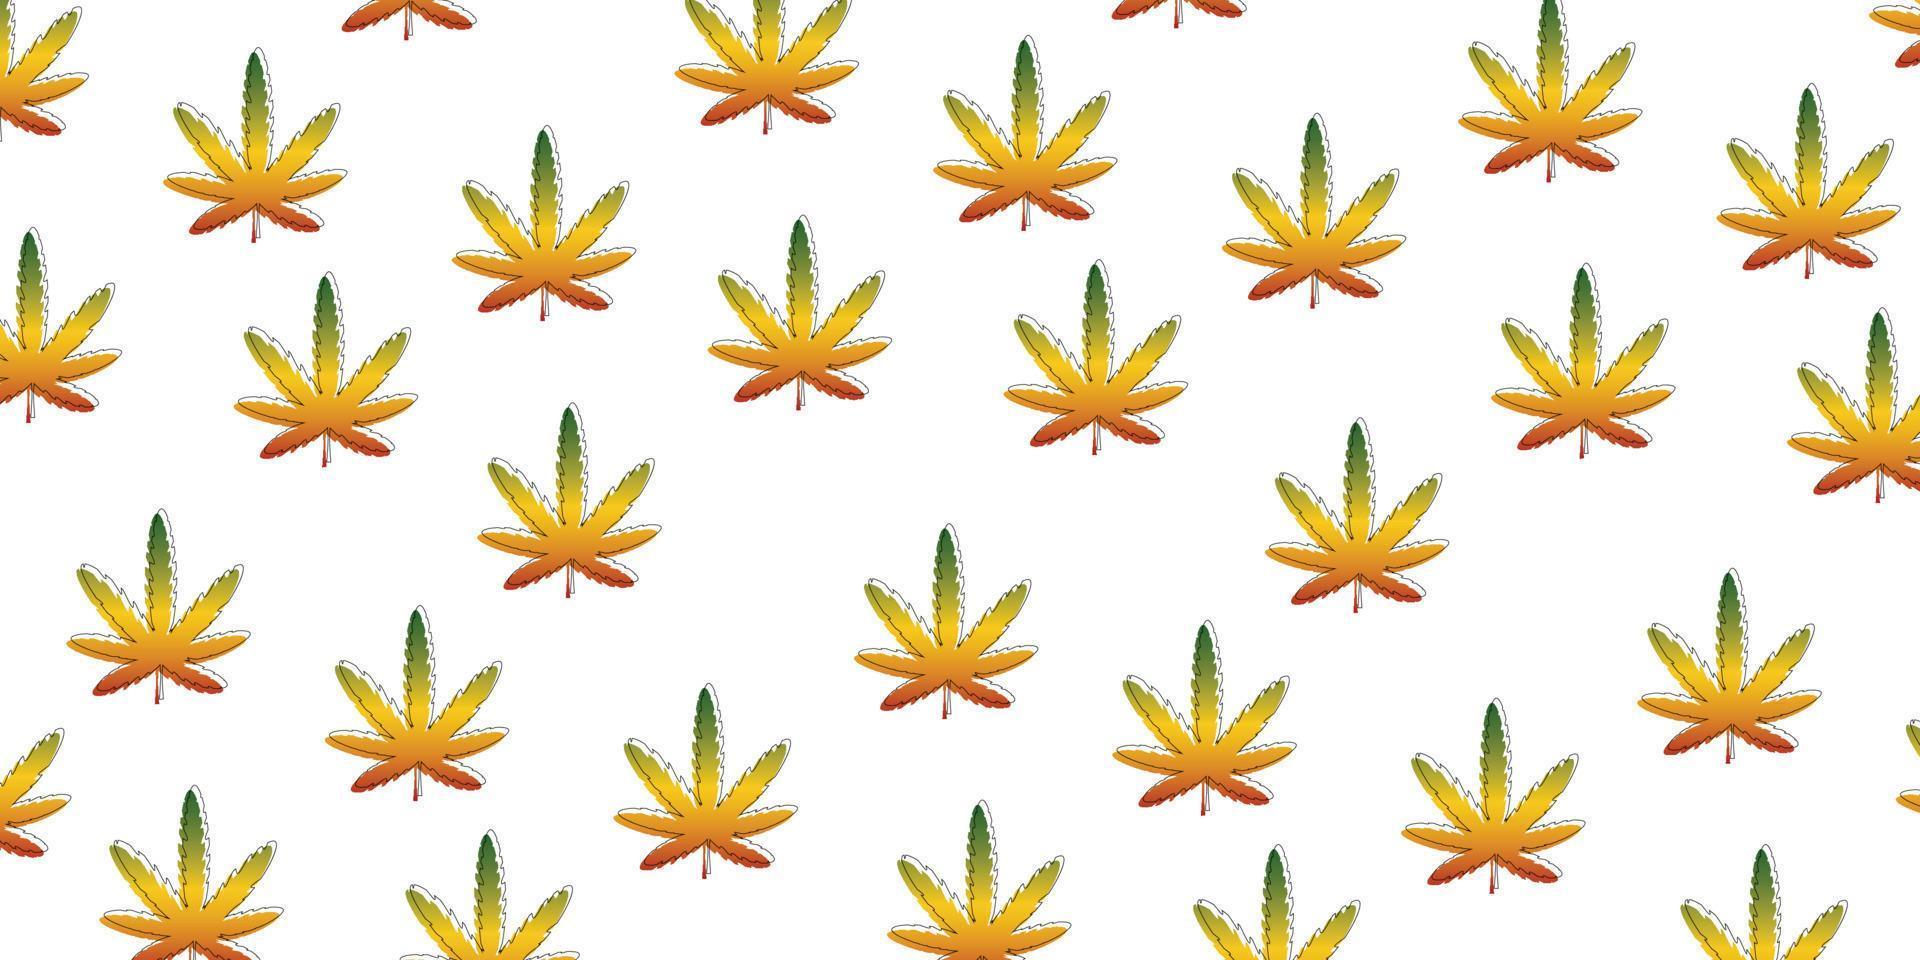 reagge jamaica with marijuana style pattern background vector